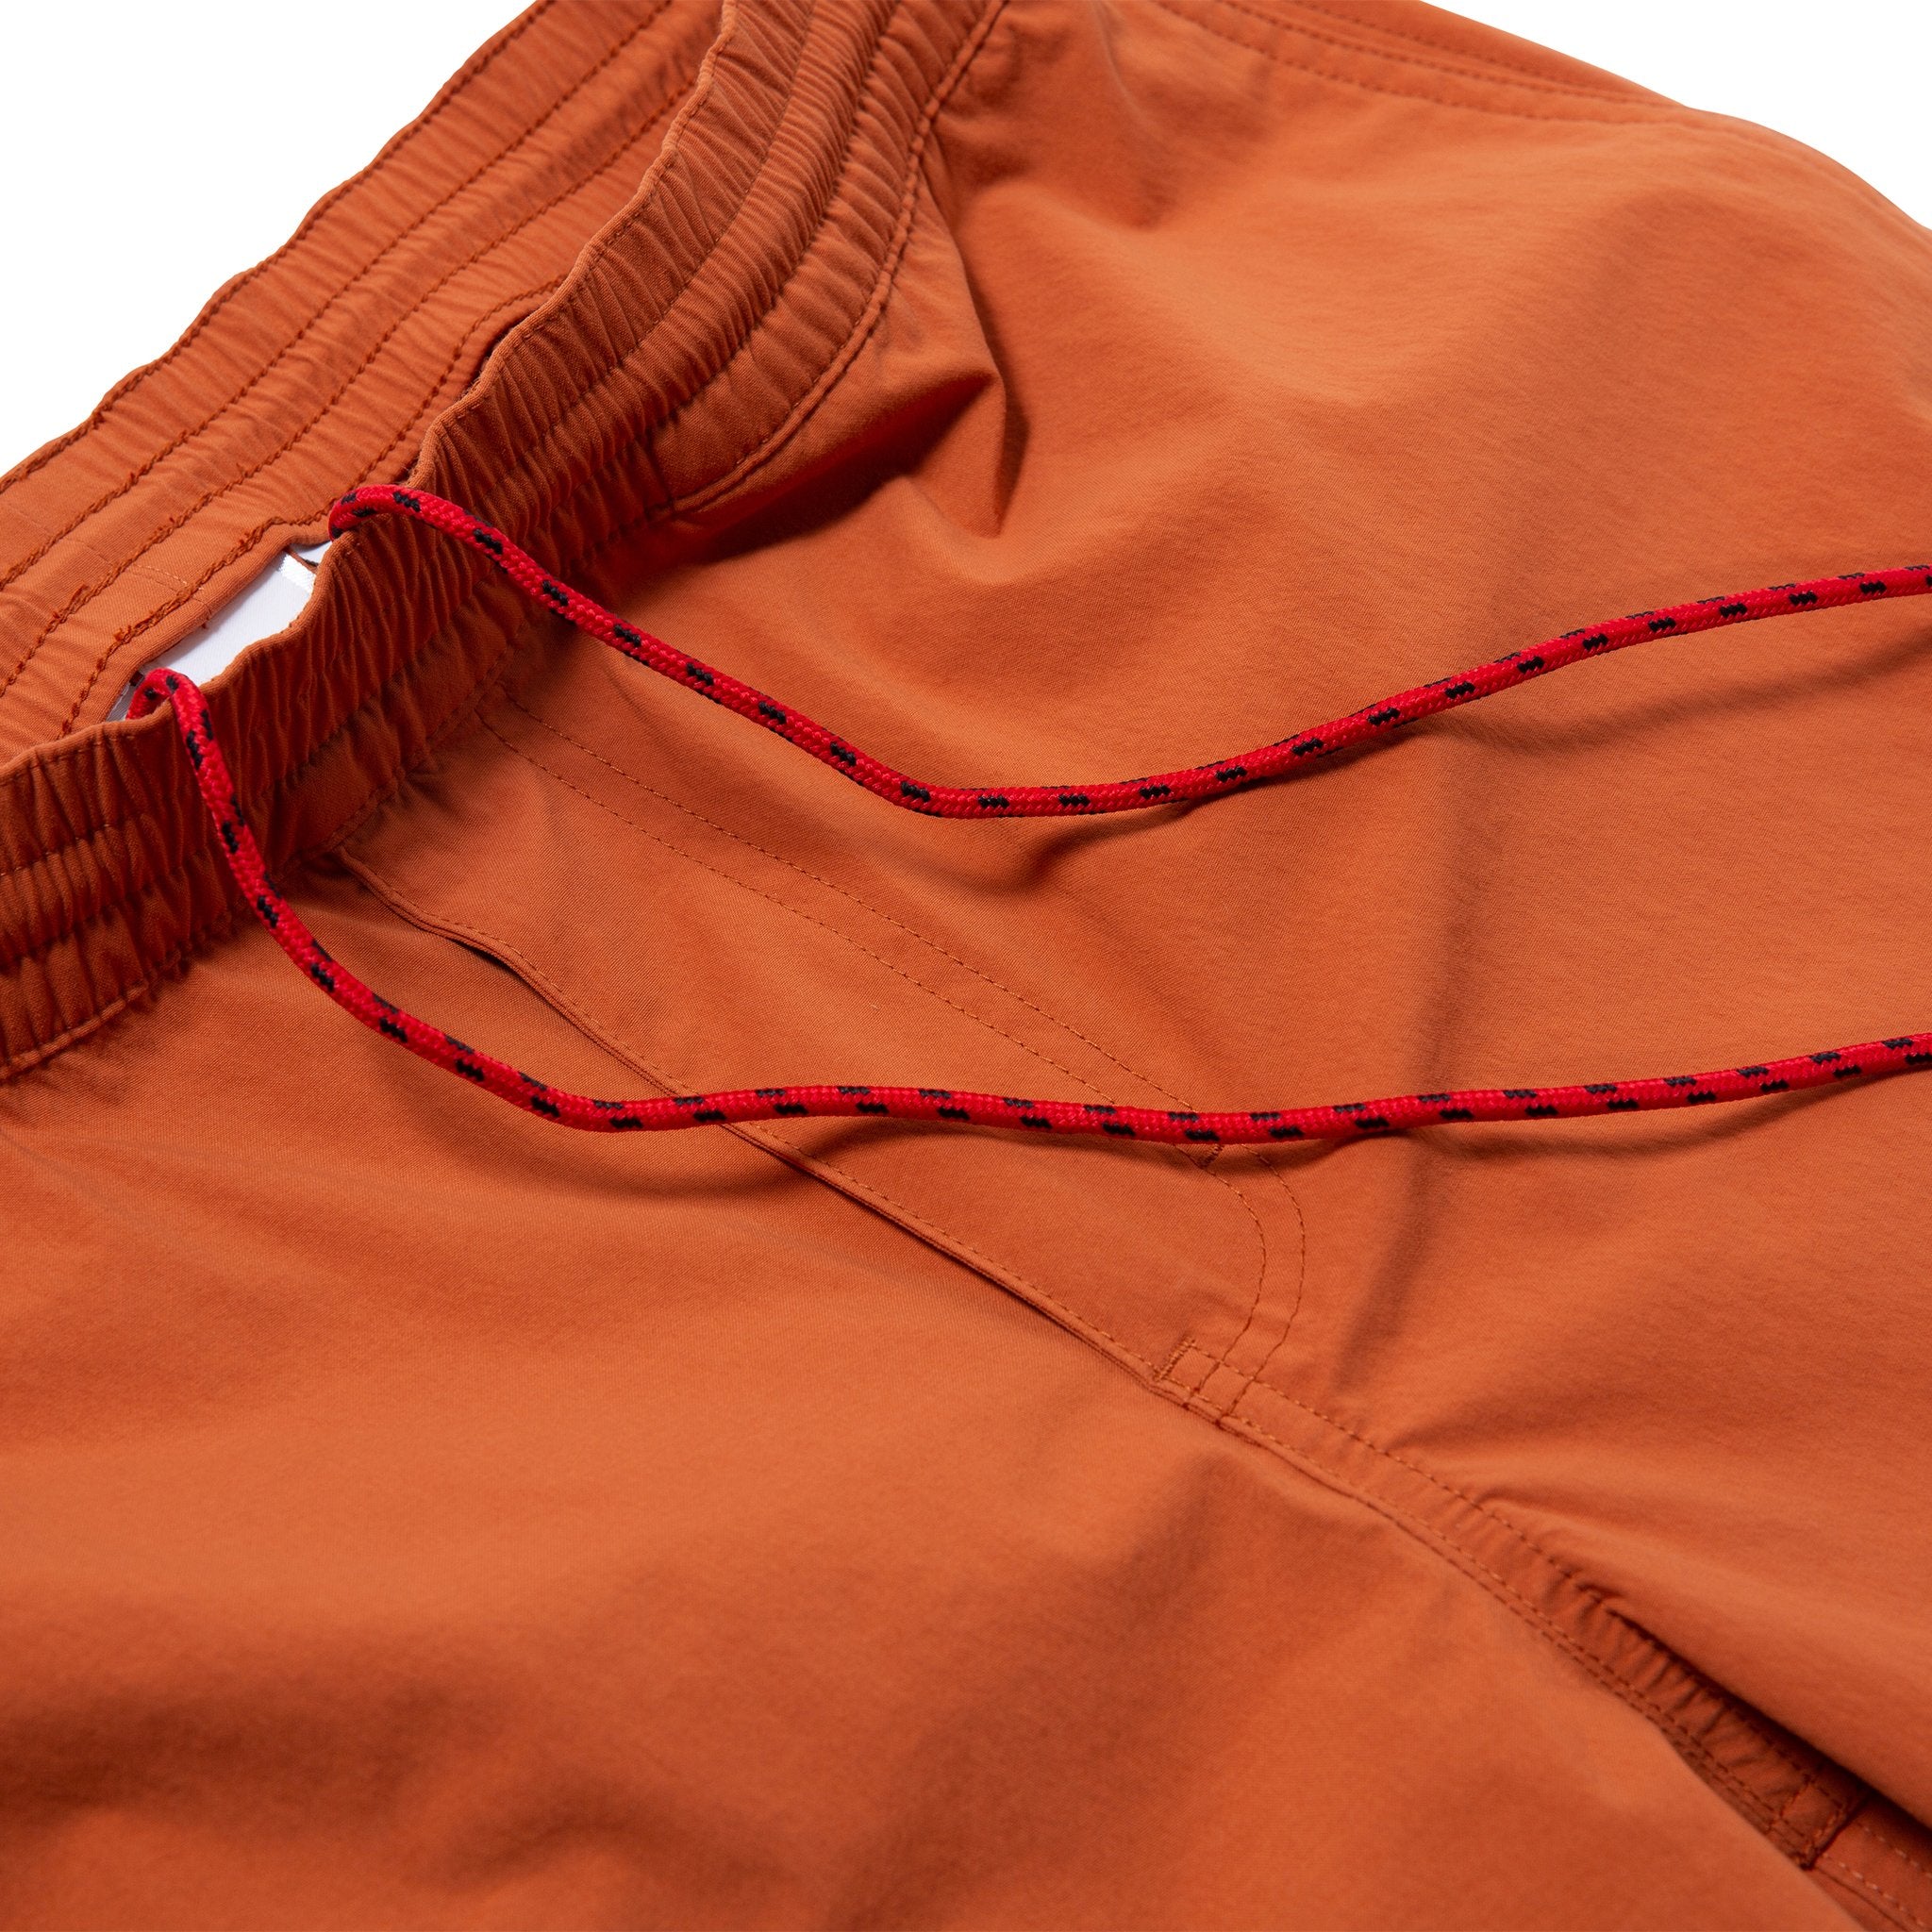 Detail shot of Topo Designs Men's Global Shorts in Clay showing elastic waist with drawstring